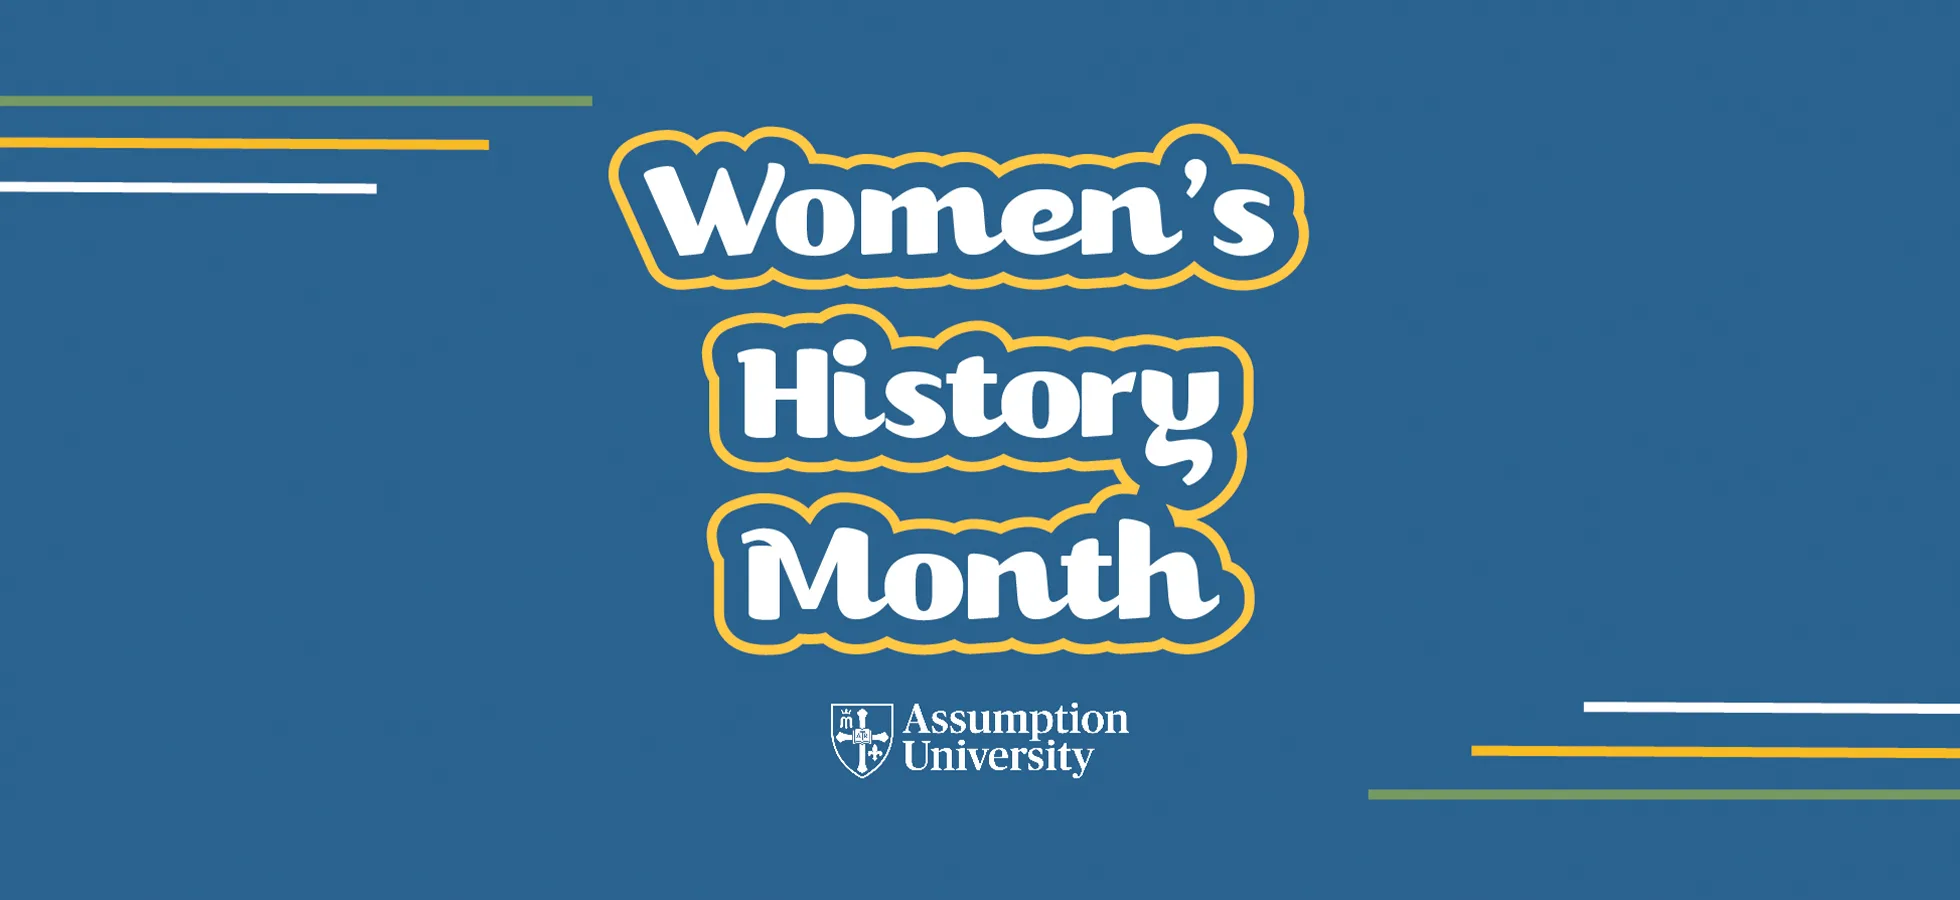 To honor Women's History Month at Assumption, members of the women's studies program shared the importance of highlighting women’s history and women’s studies and their favorite aspects of the program.